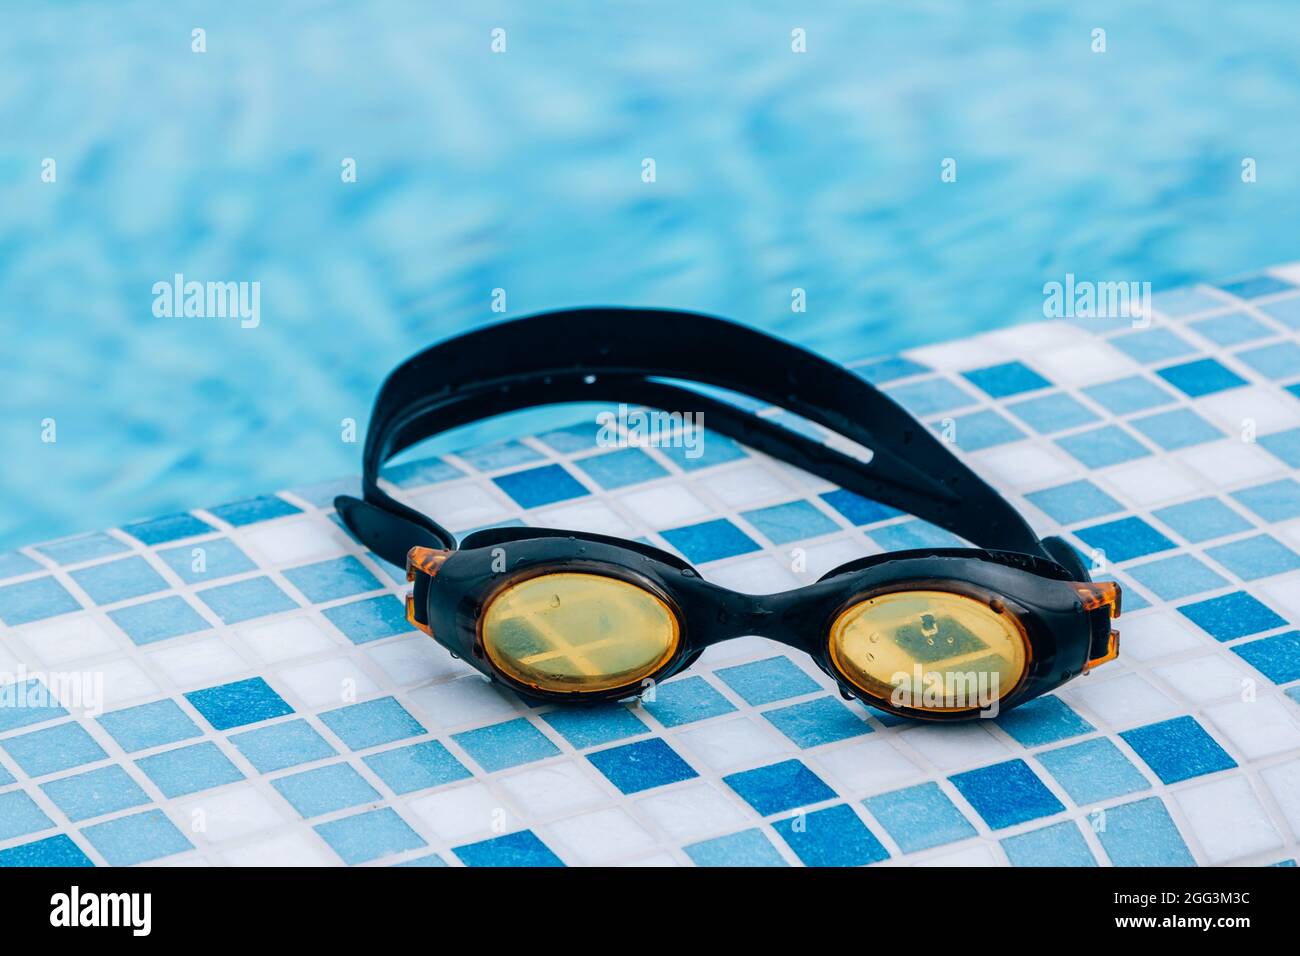 Black professional swimming goggles with water drops on yellow lenses on a blue and white tiles of pool floor. Stock Photo